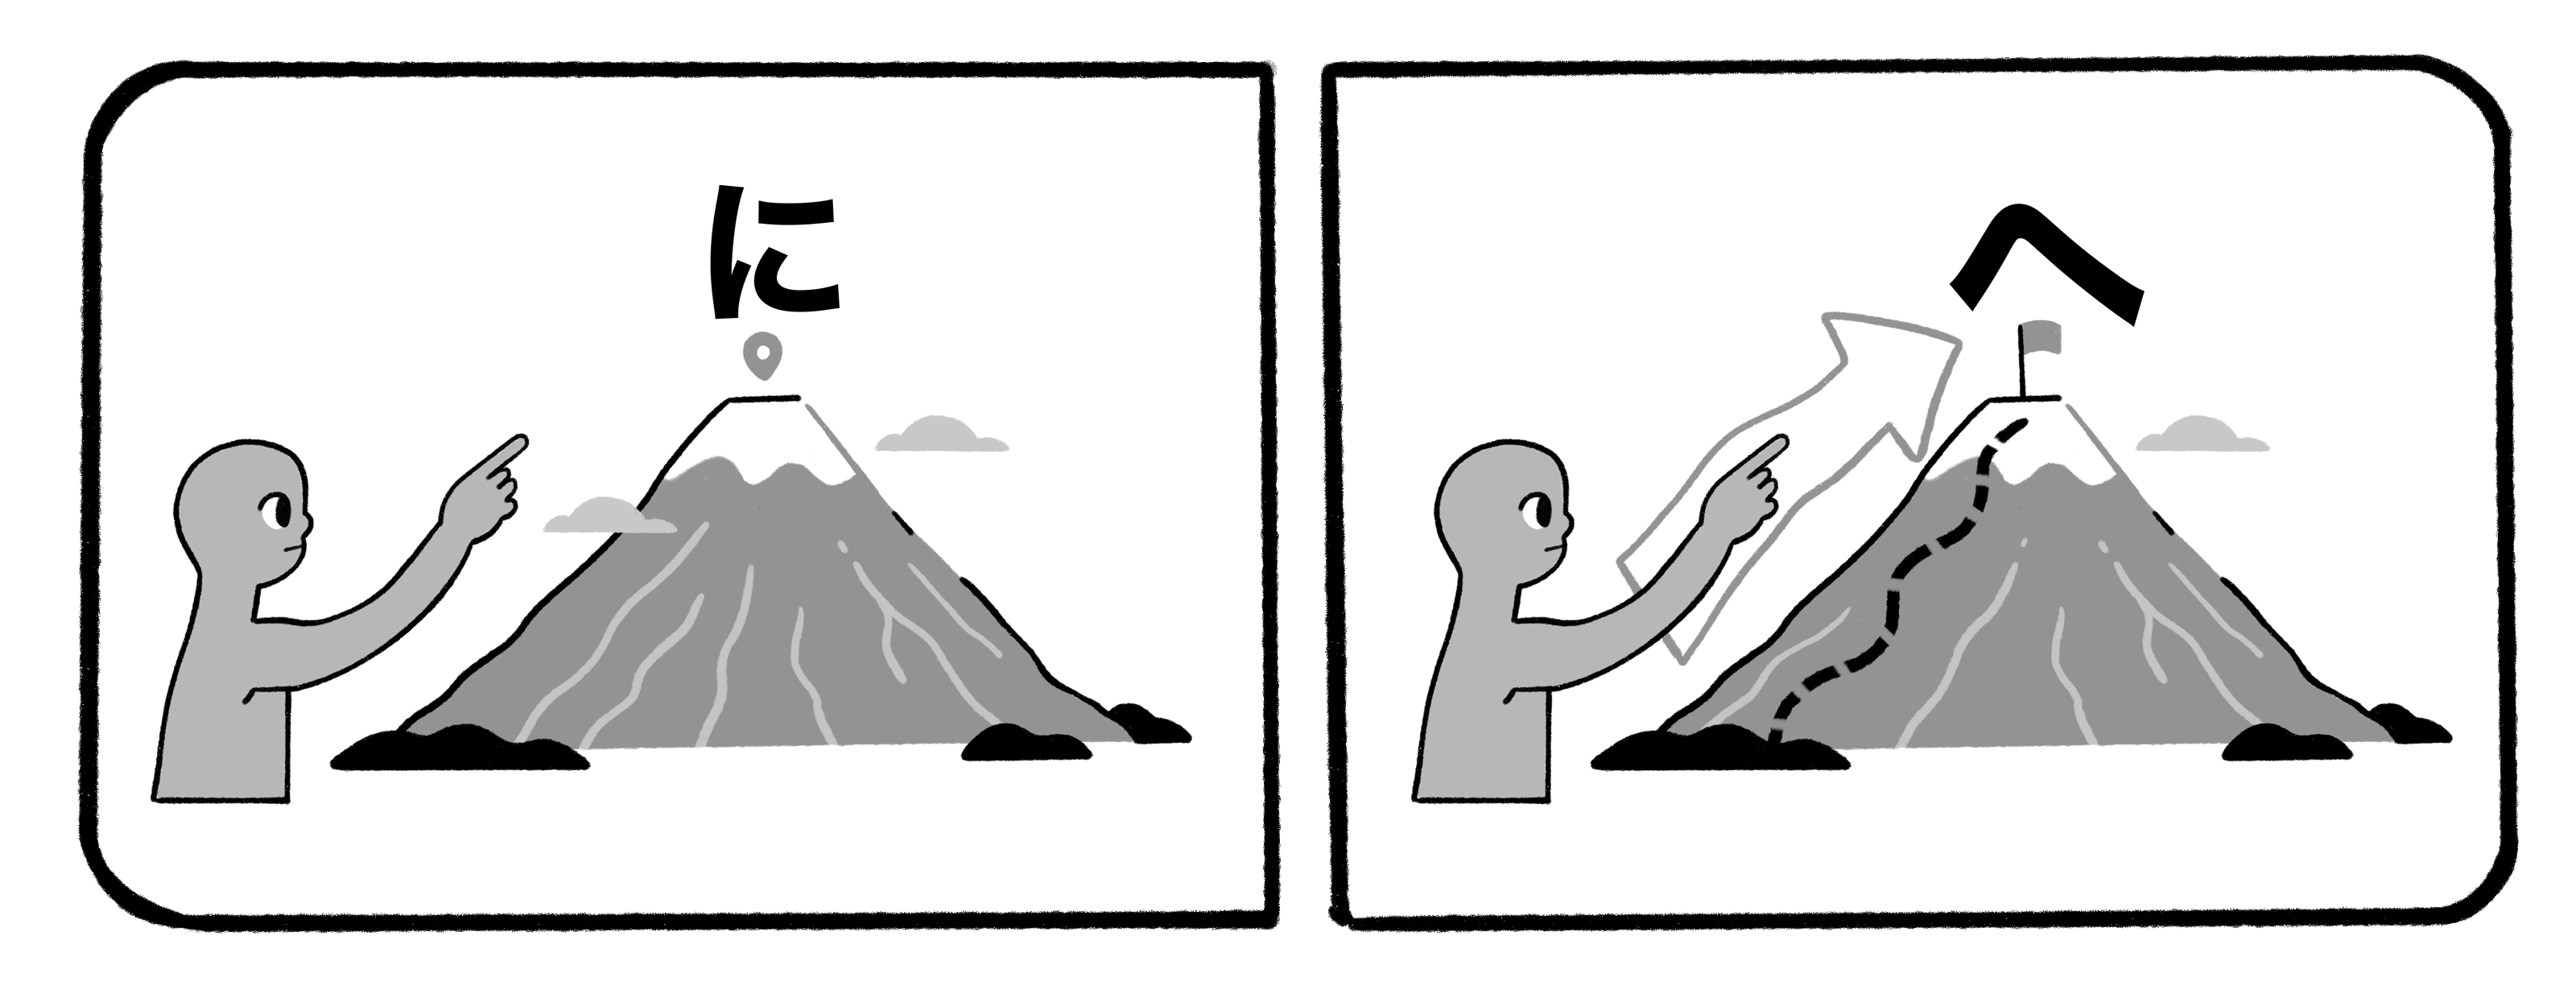 two mountains, one with に and one with へ at the top